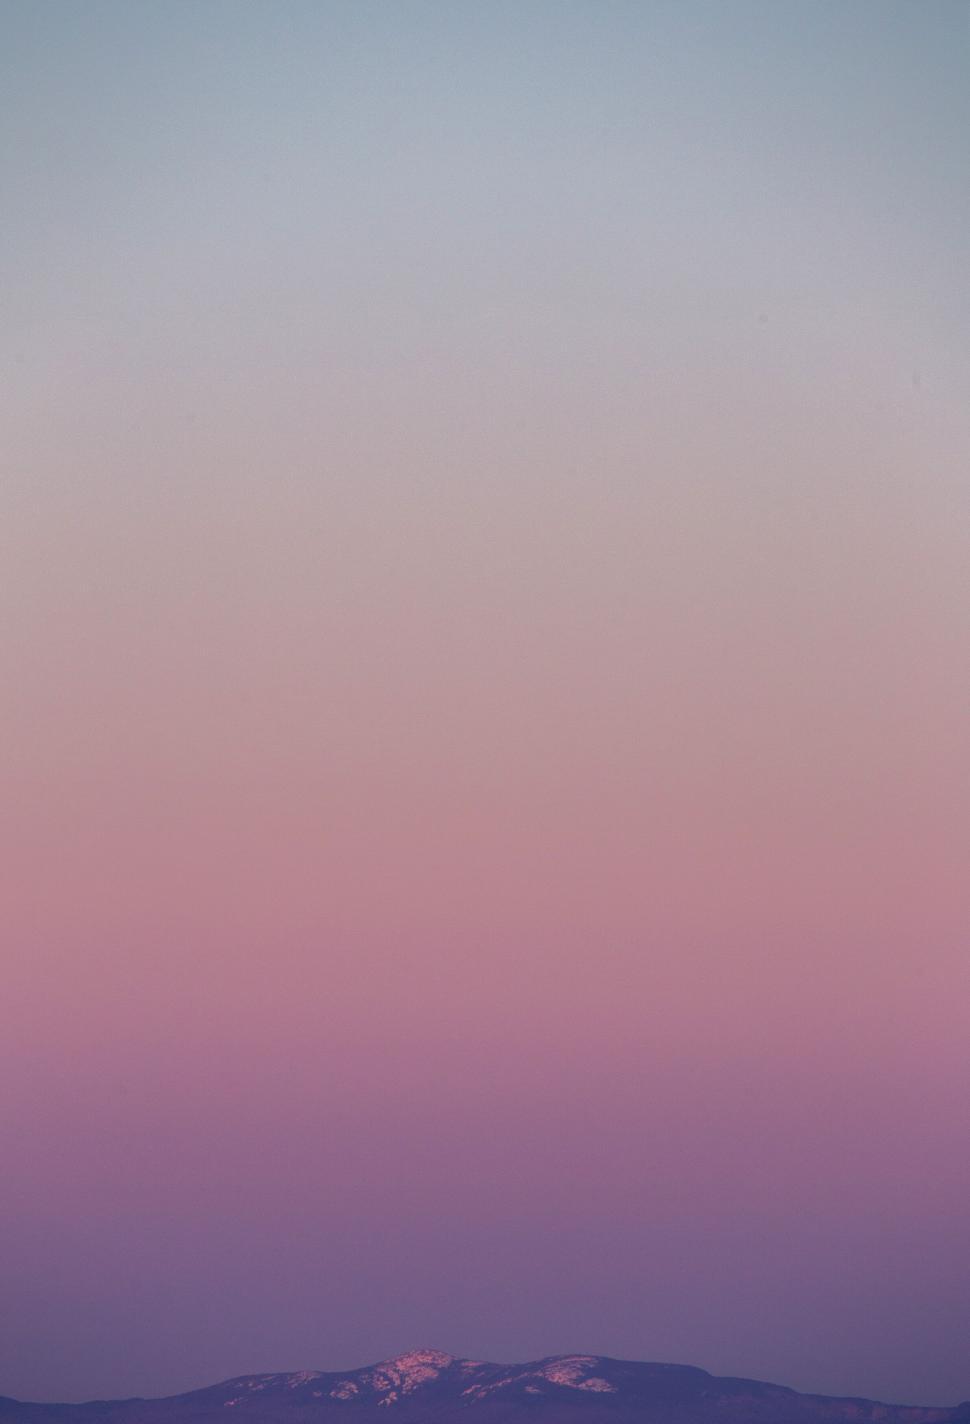 Free Image of Gradient sky over mountain silhouette 